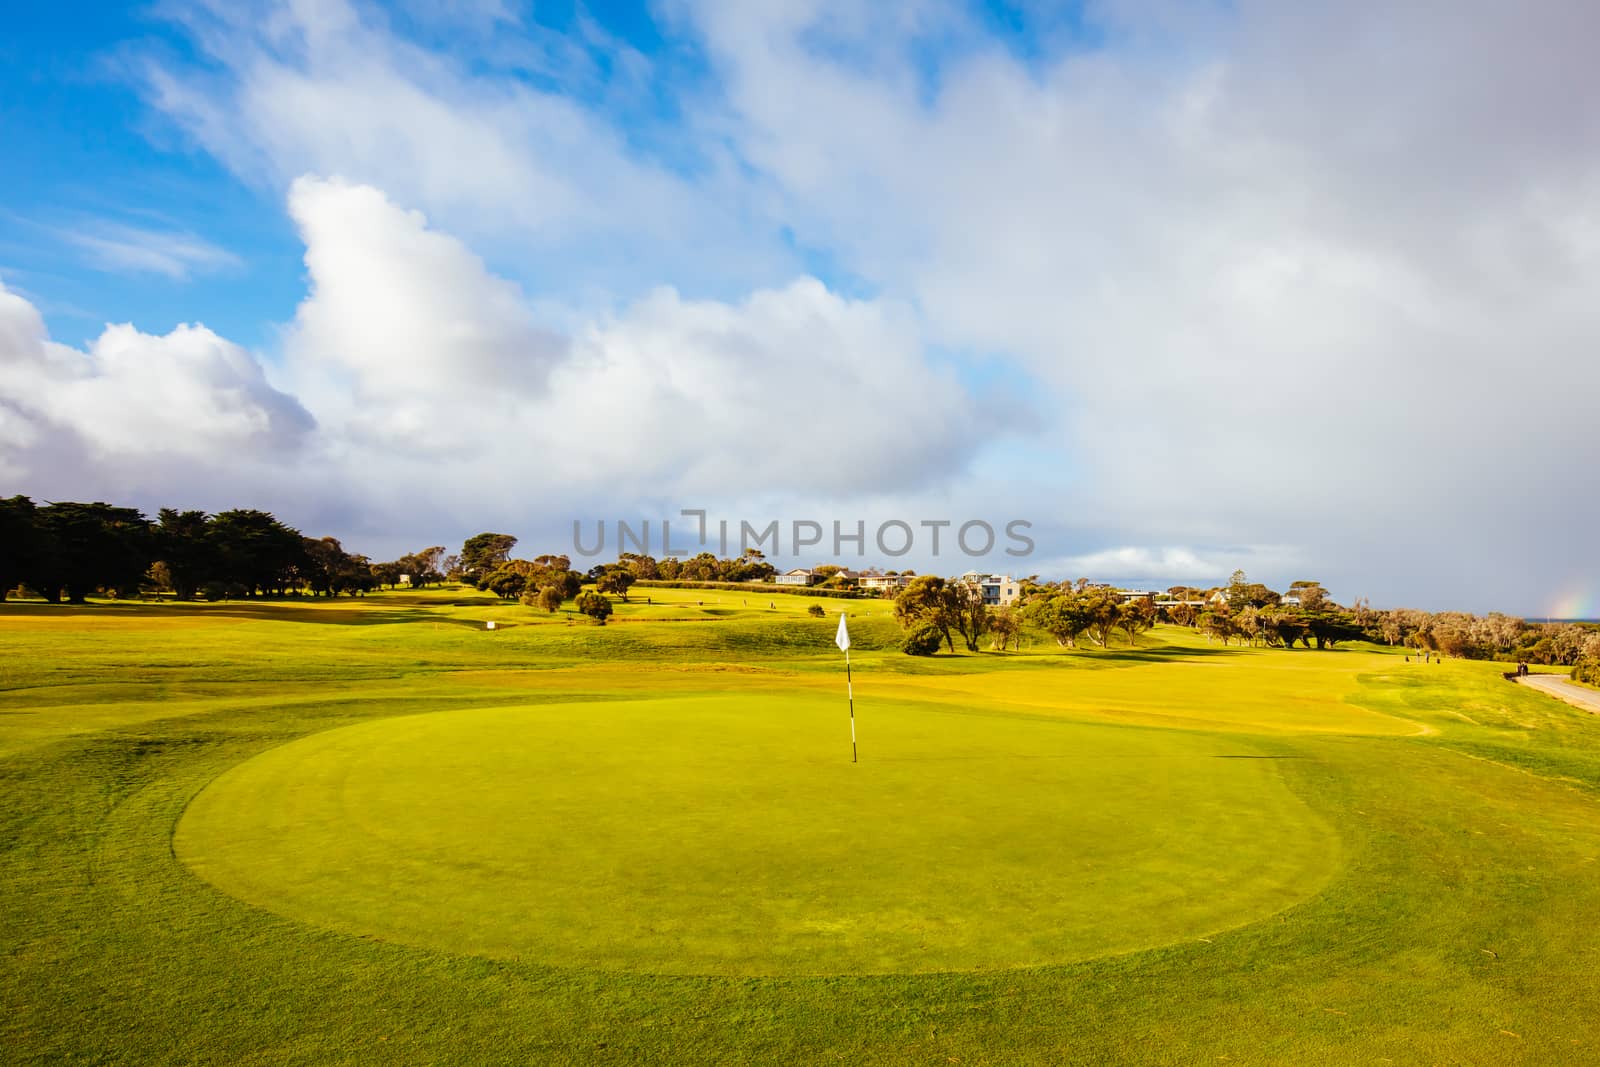 Flinders Golf Course on the Mornington Peninsula on a winter's afternoon in Victoria, Australia